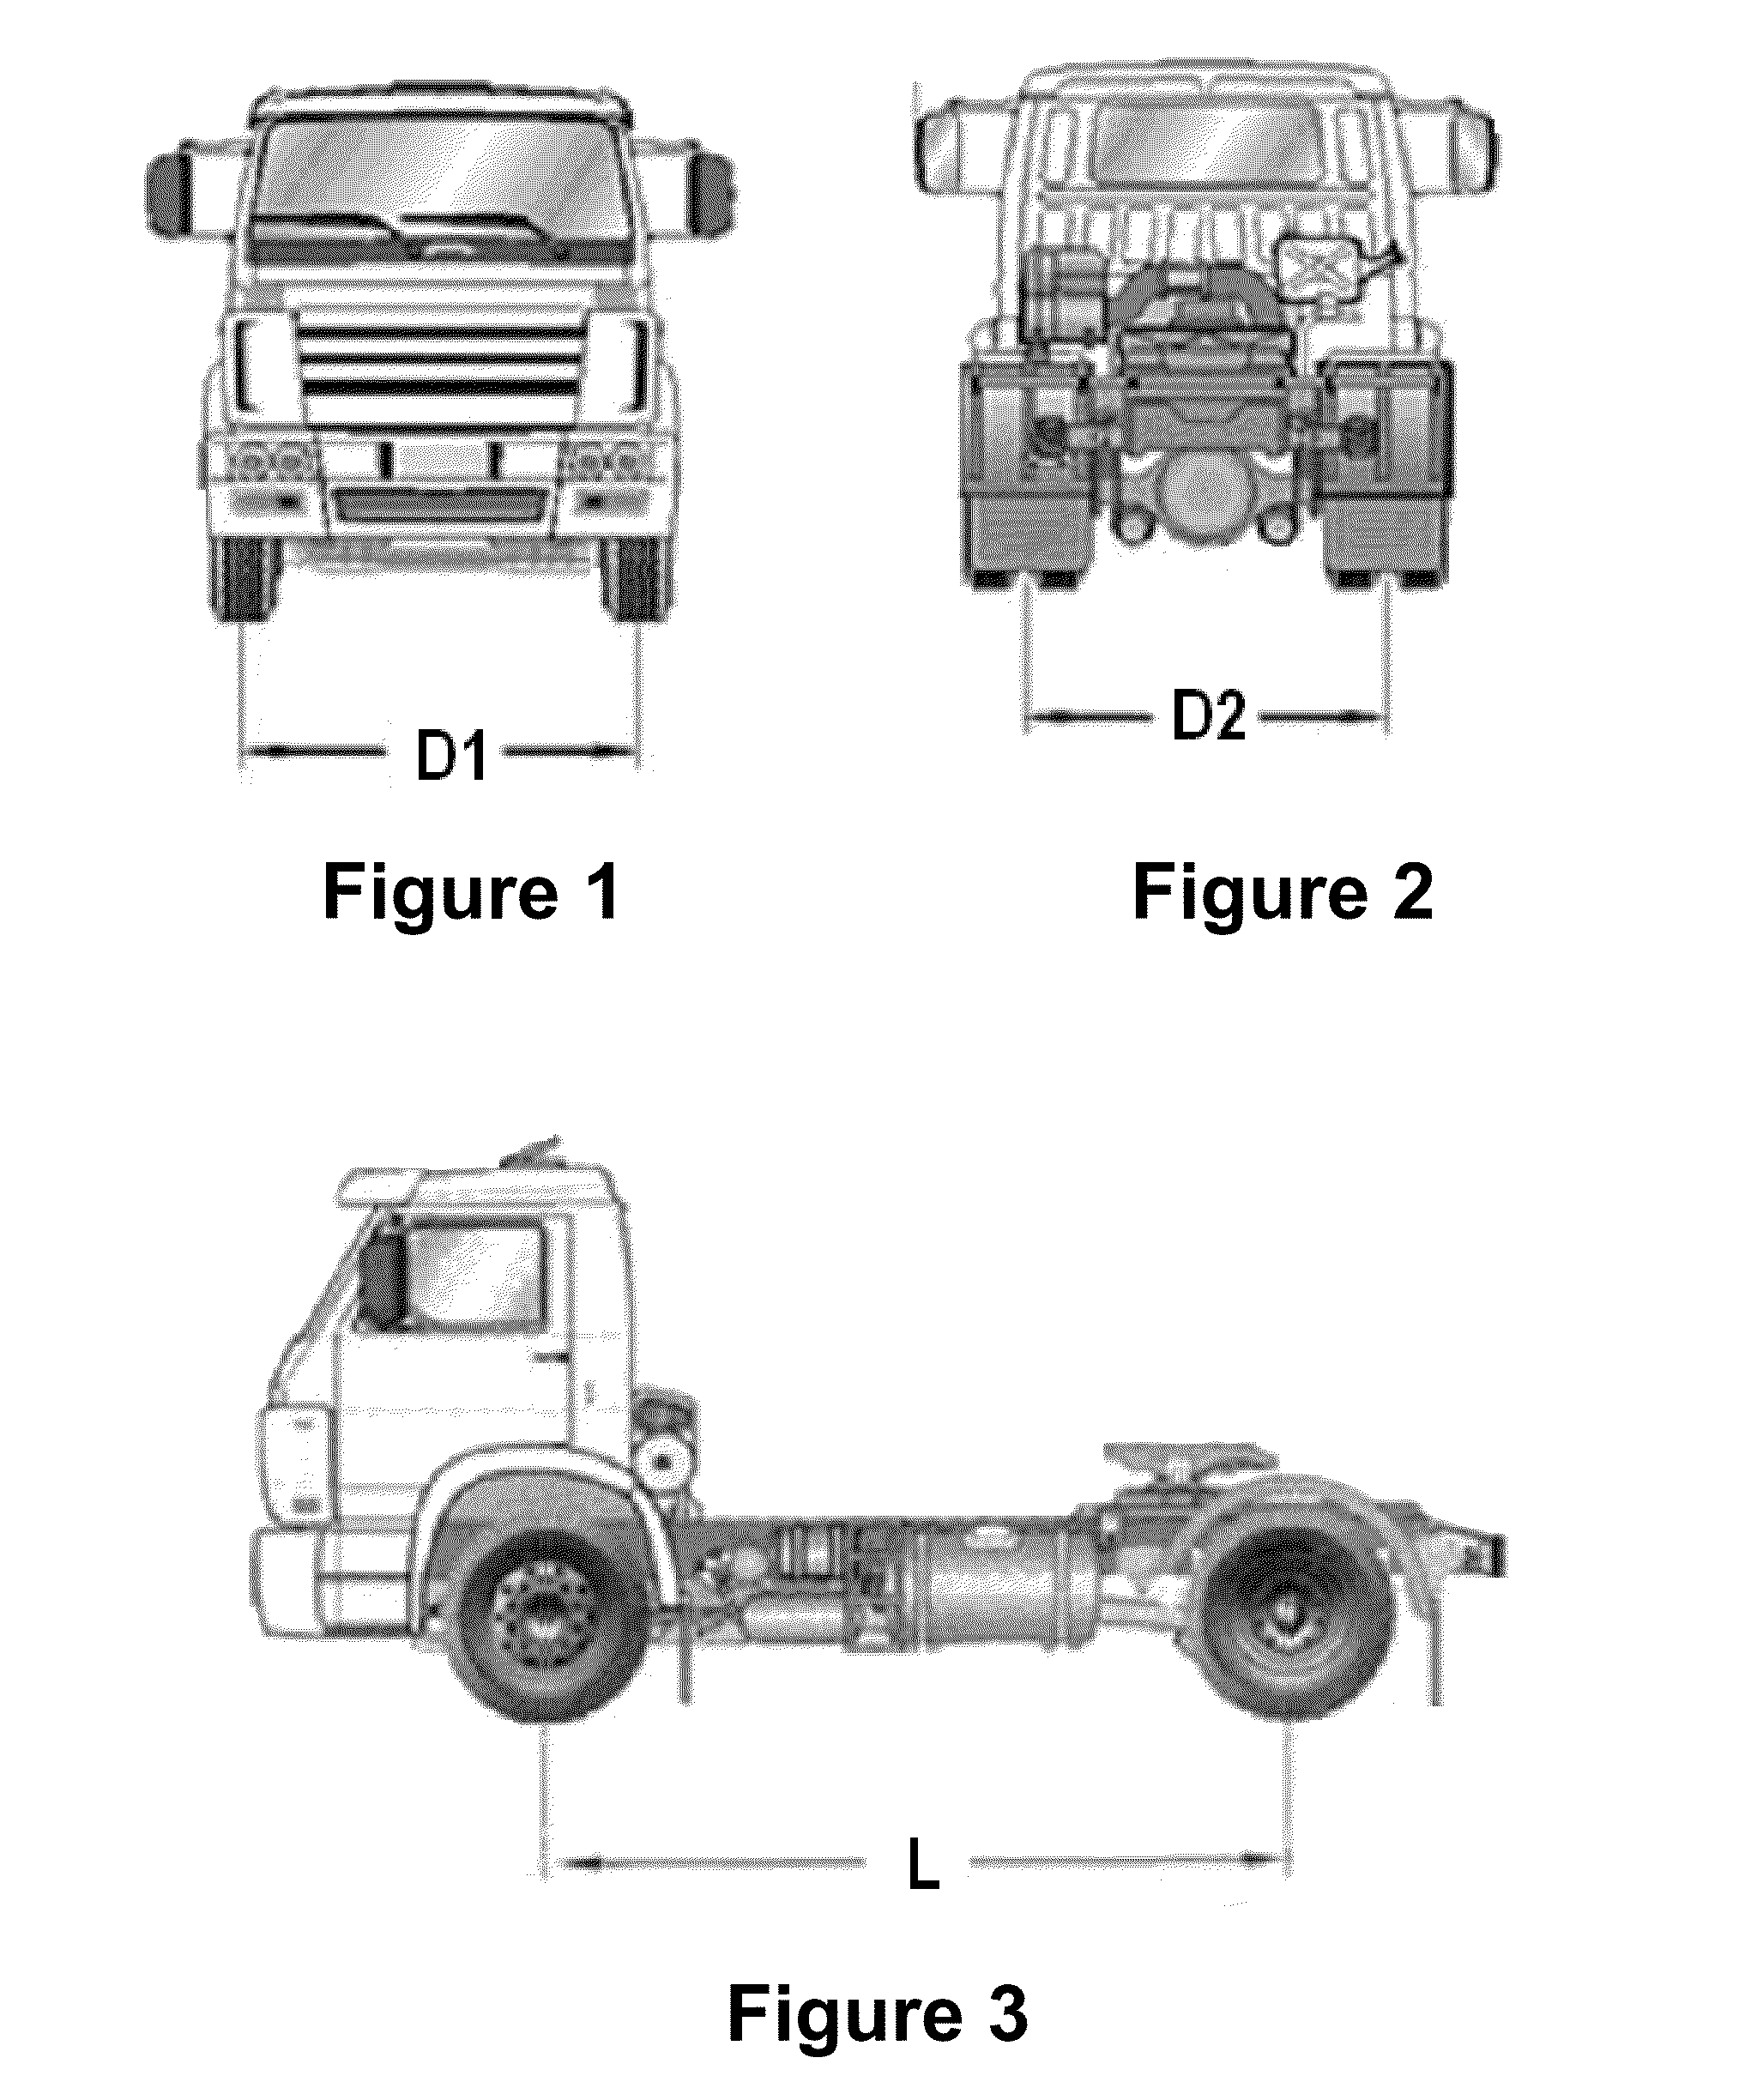 Method for producing a fibre concrete slab for paving low-traffic roads, concrete slab, and method for paving low-traffic roads